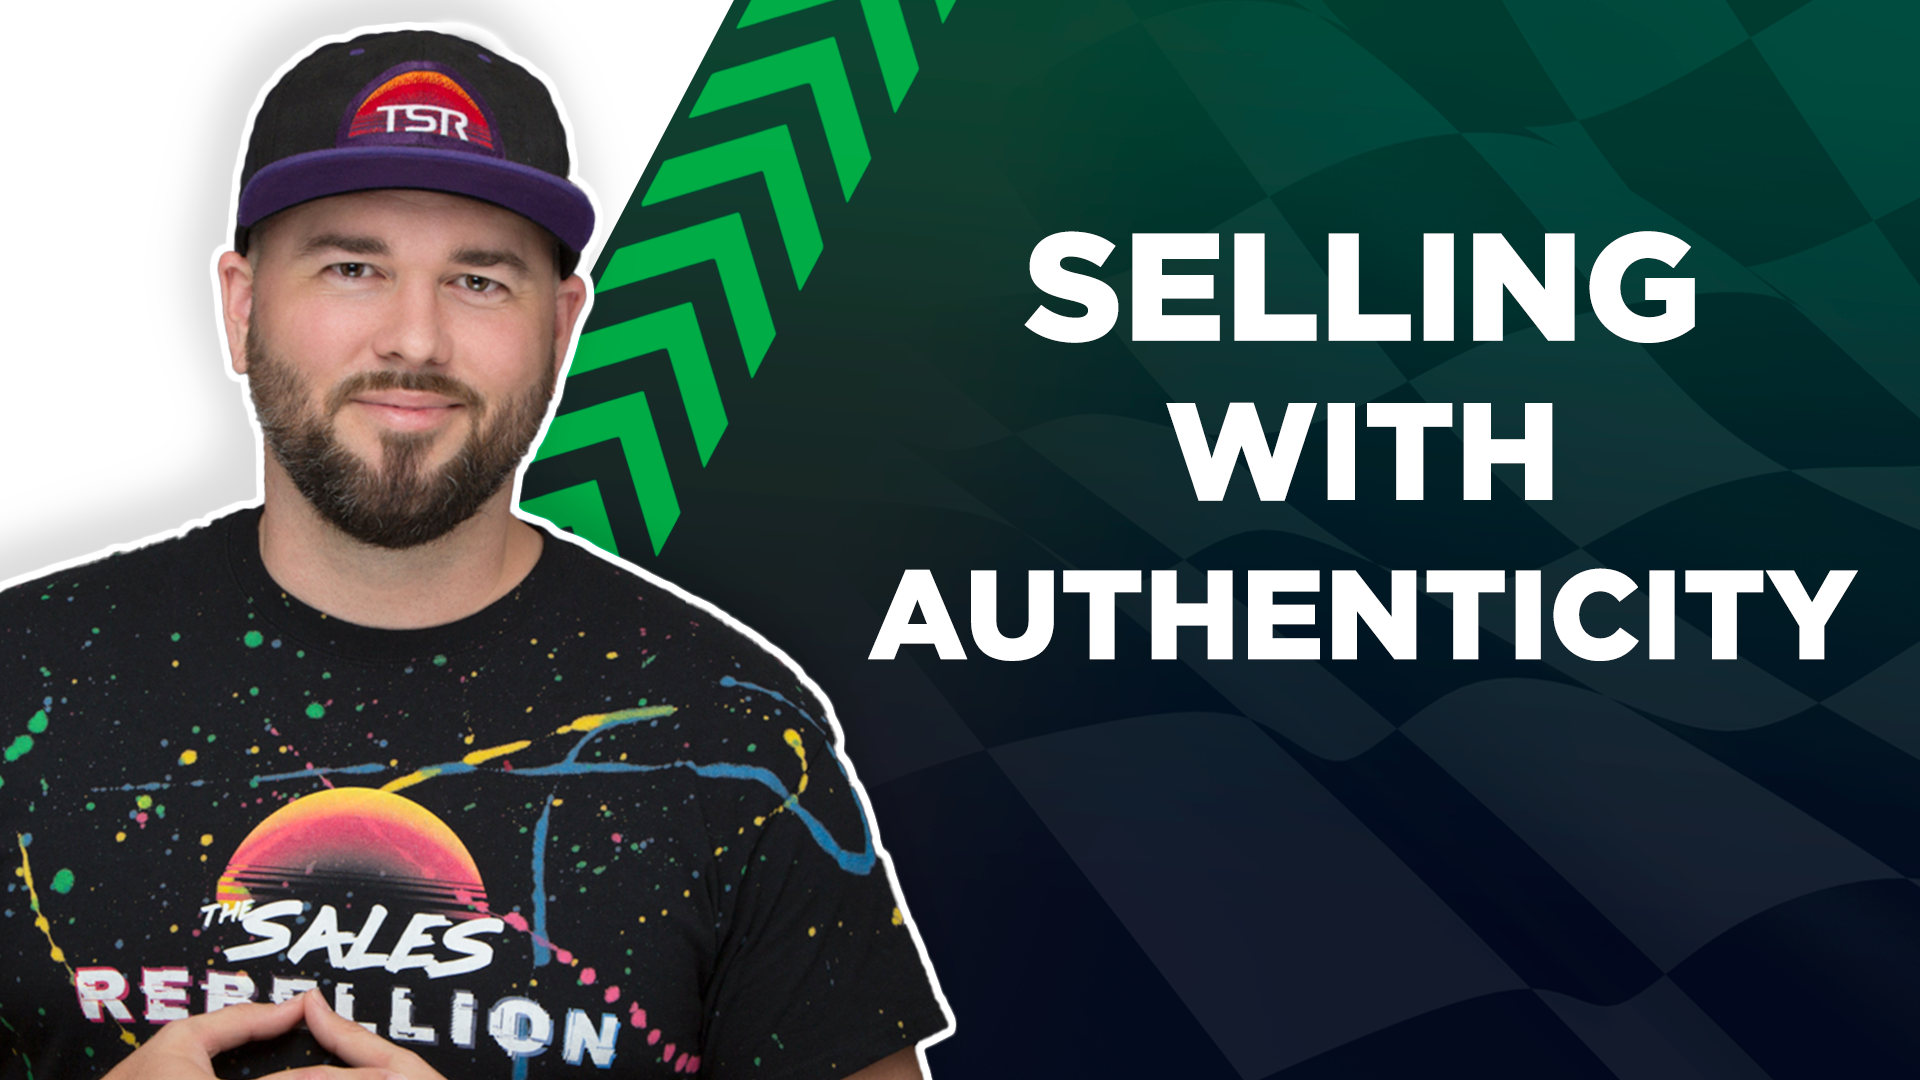 Podcast Pit Stop: Dale Dupree on Selling with Authenticity